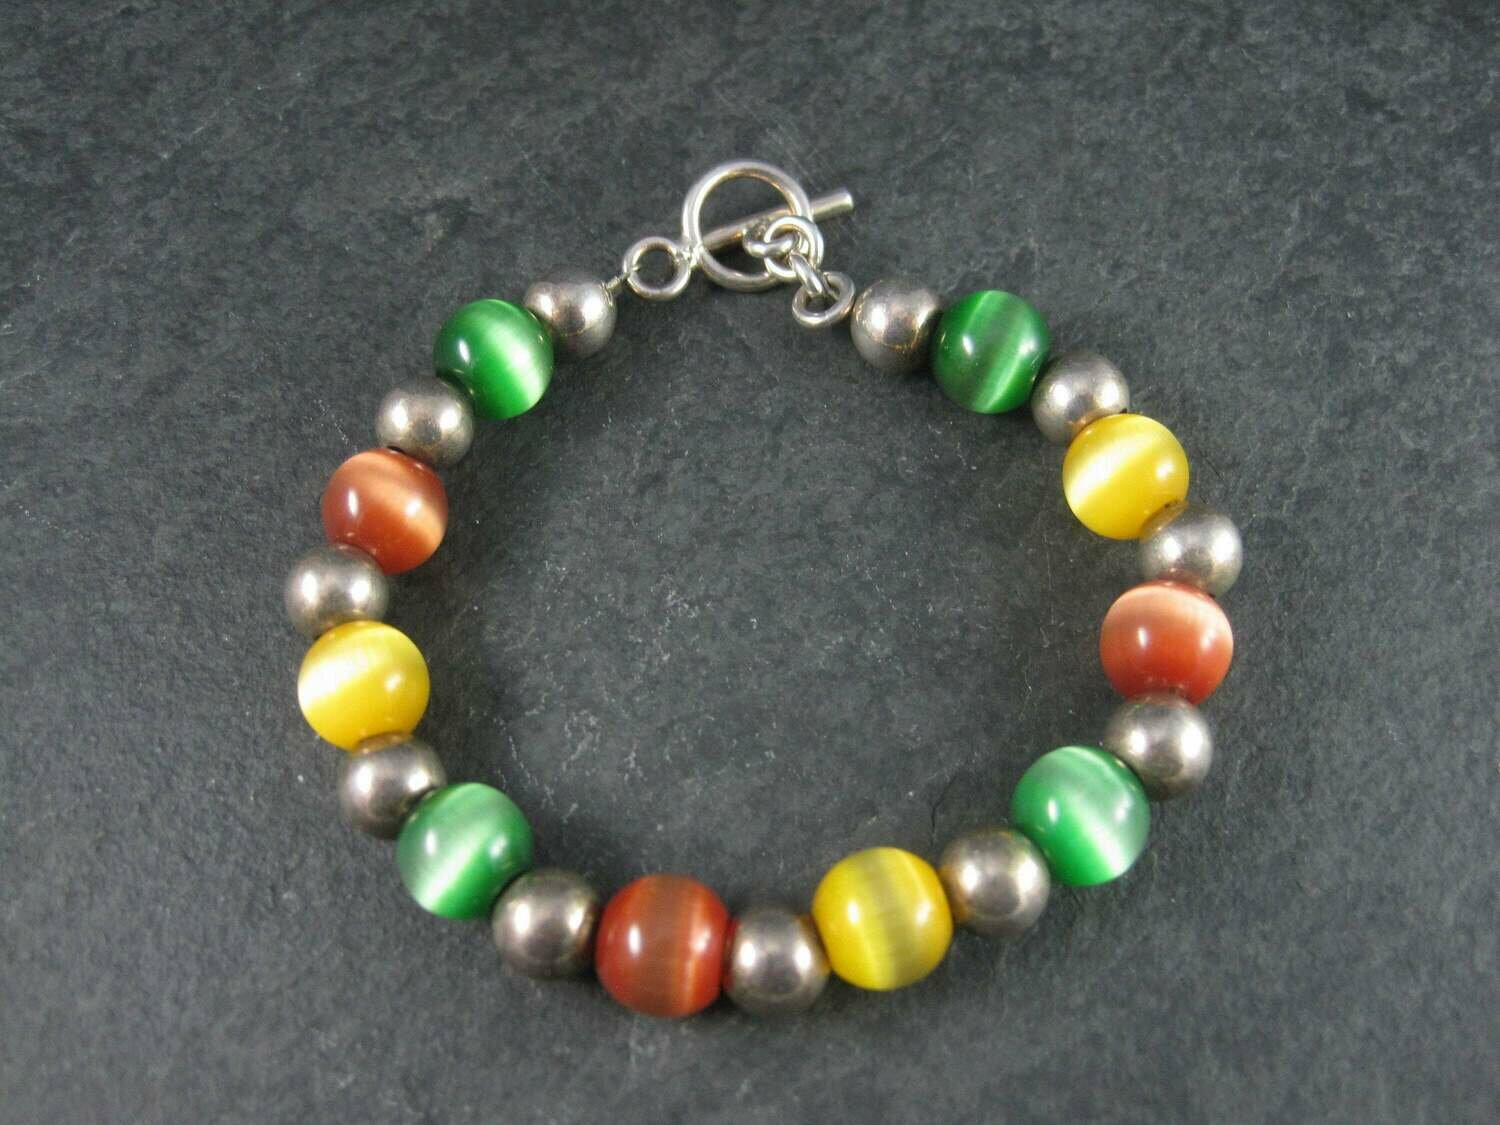 Chunky Vintage Sterling Cats Eye Bead Toggle Bracelet 7.5 Inches